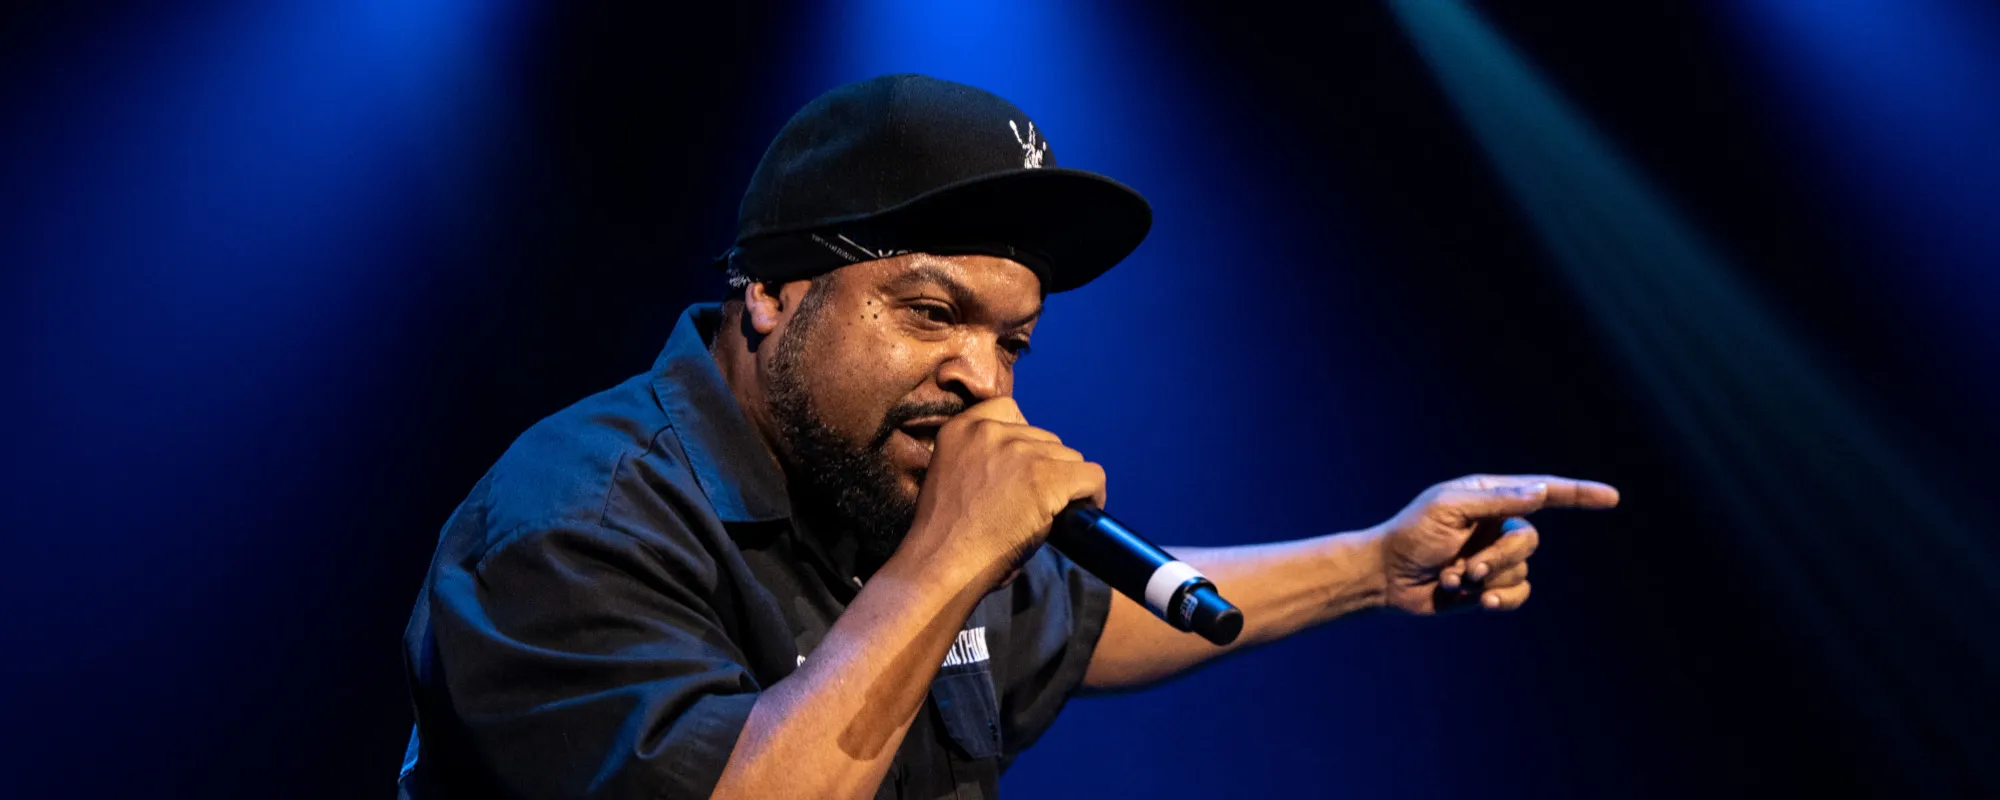 https://americansongwriter.com/wp-content/uploads/2023/03/Ice-Cube-GettyImages-1450891656.jpg?fit=2000%2C800